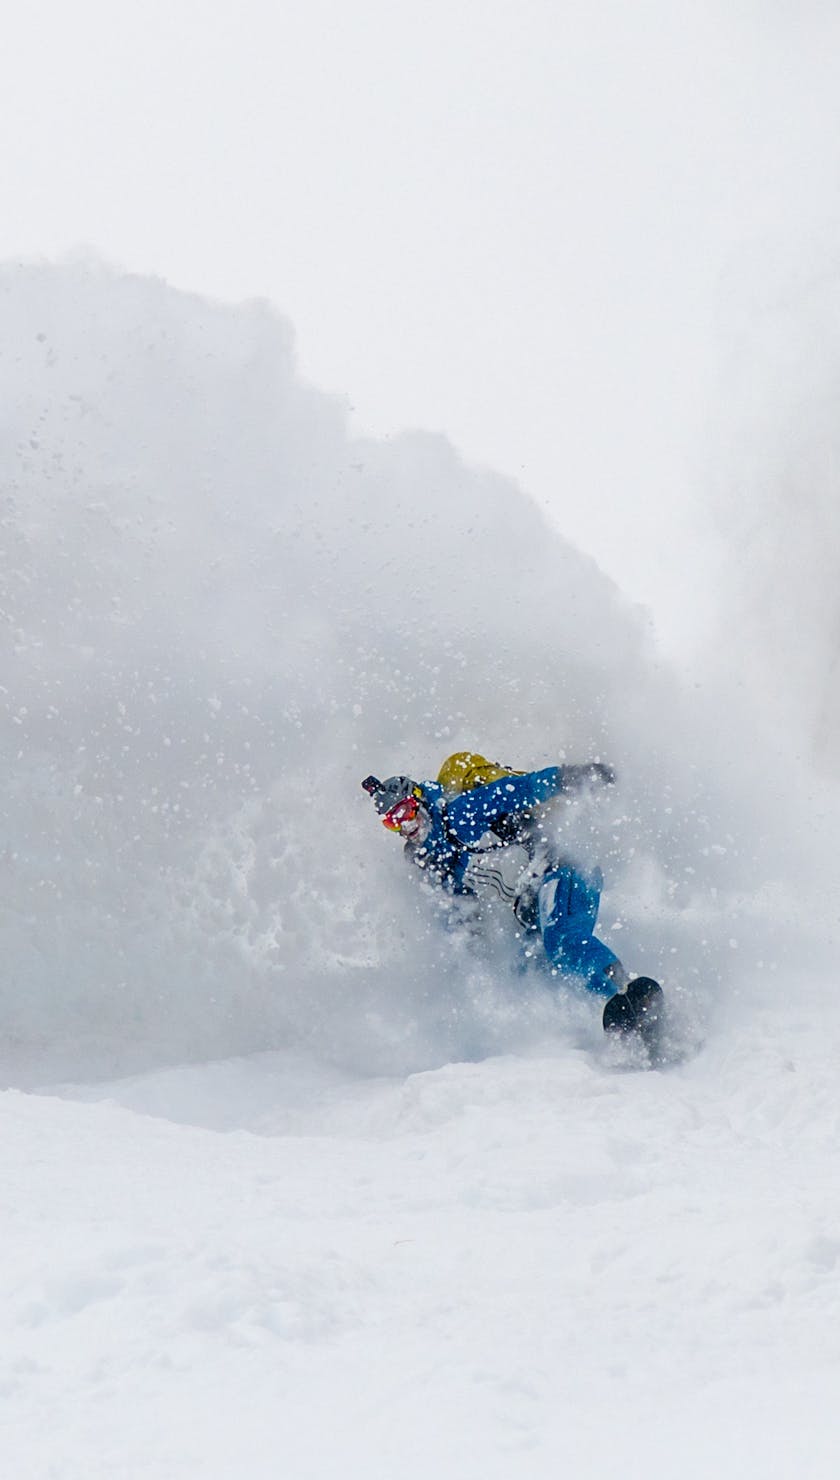 Bundle and save. A snowboarder in the white room. 